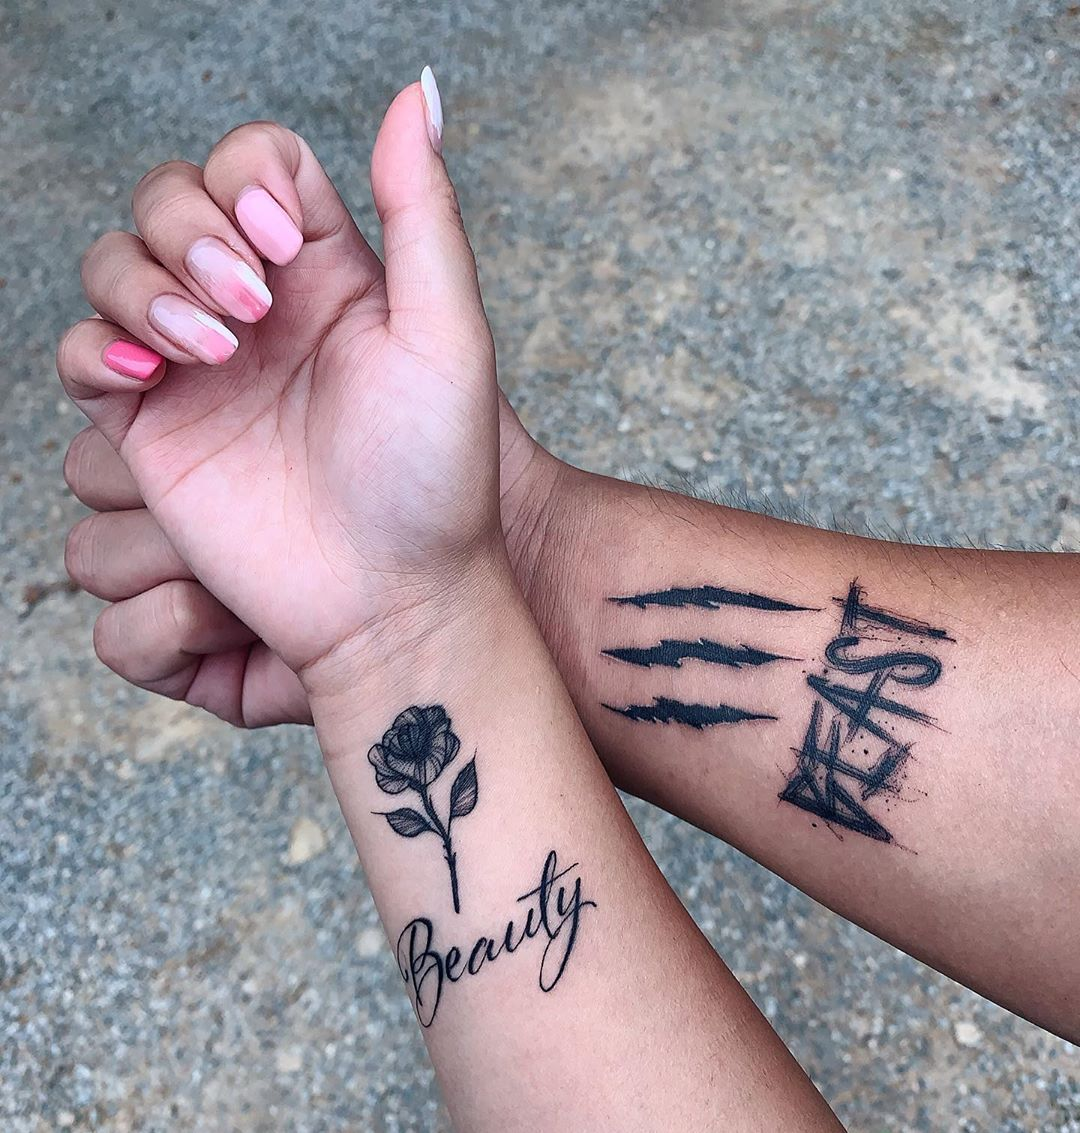 Matching Couple Tattoos for Men - Ideas and Inspiration for Guys